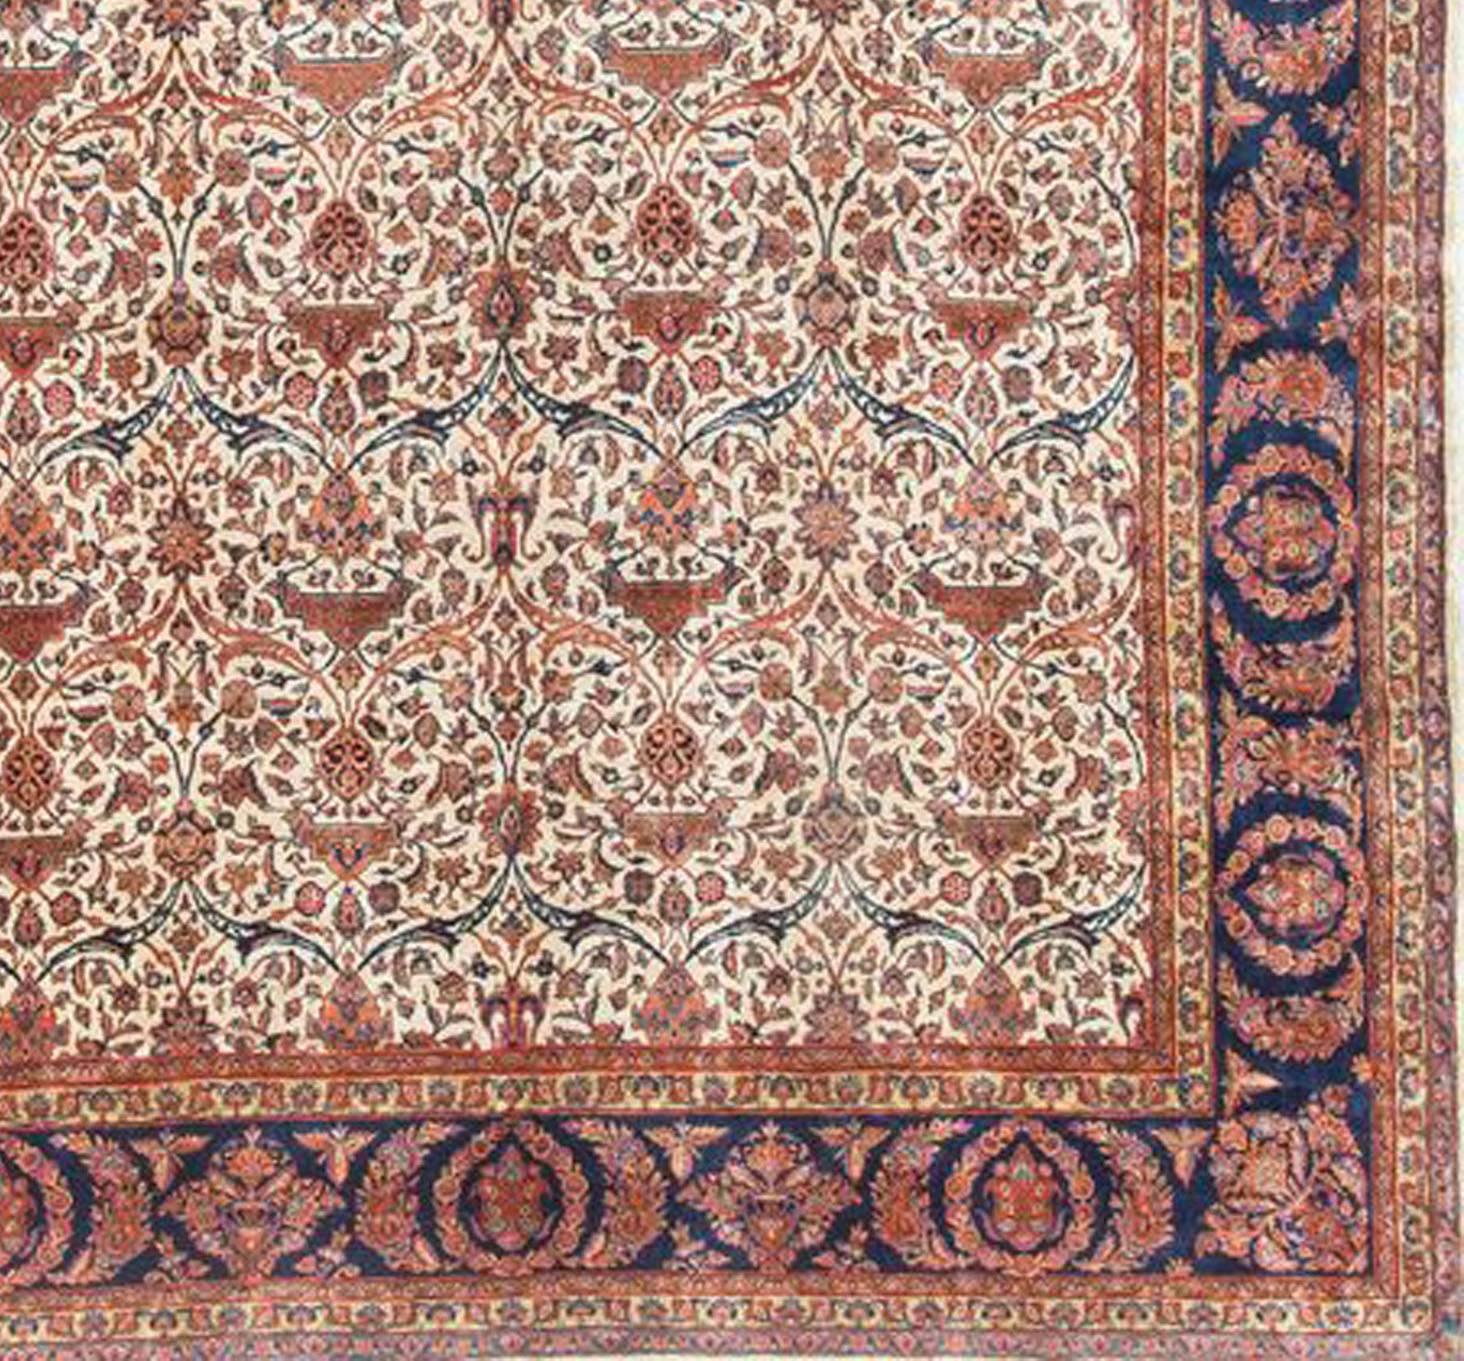 Hand-Knotted Vintage Persian Kashan Rug 10'4 x 13'11. For Sale